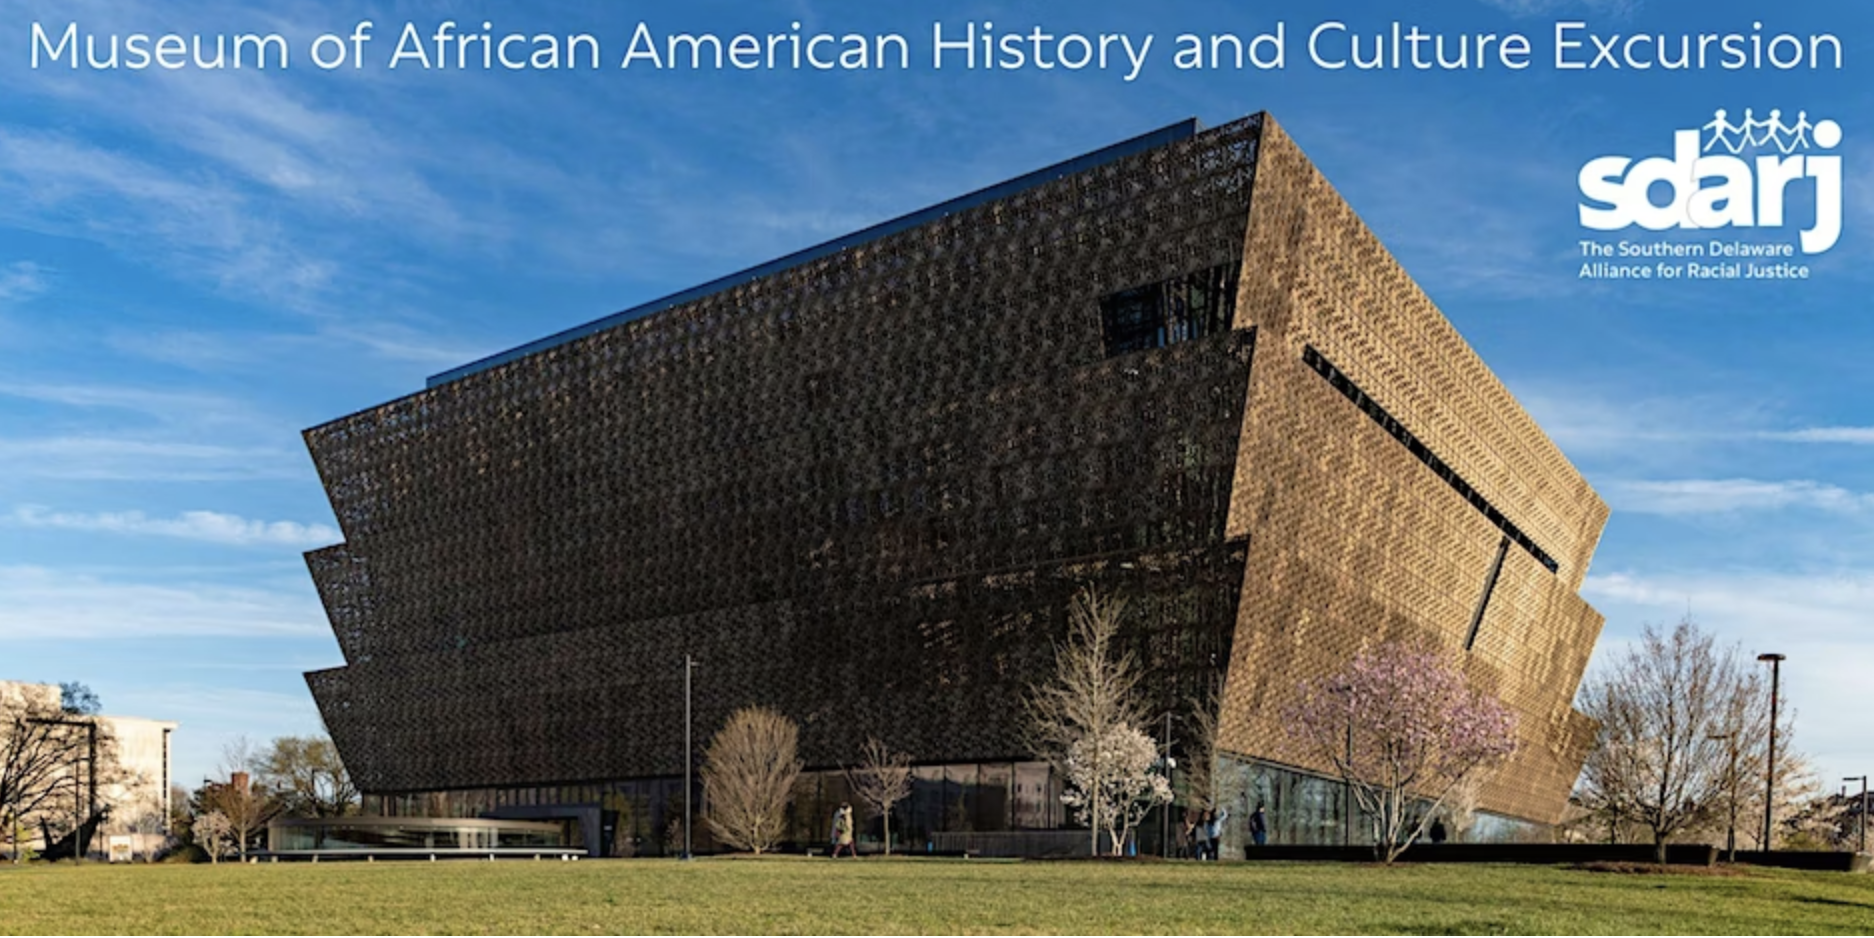 SDARJ is sponsoring an excursion to the Museum of African American History and Culture